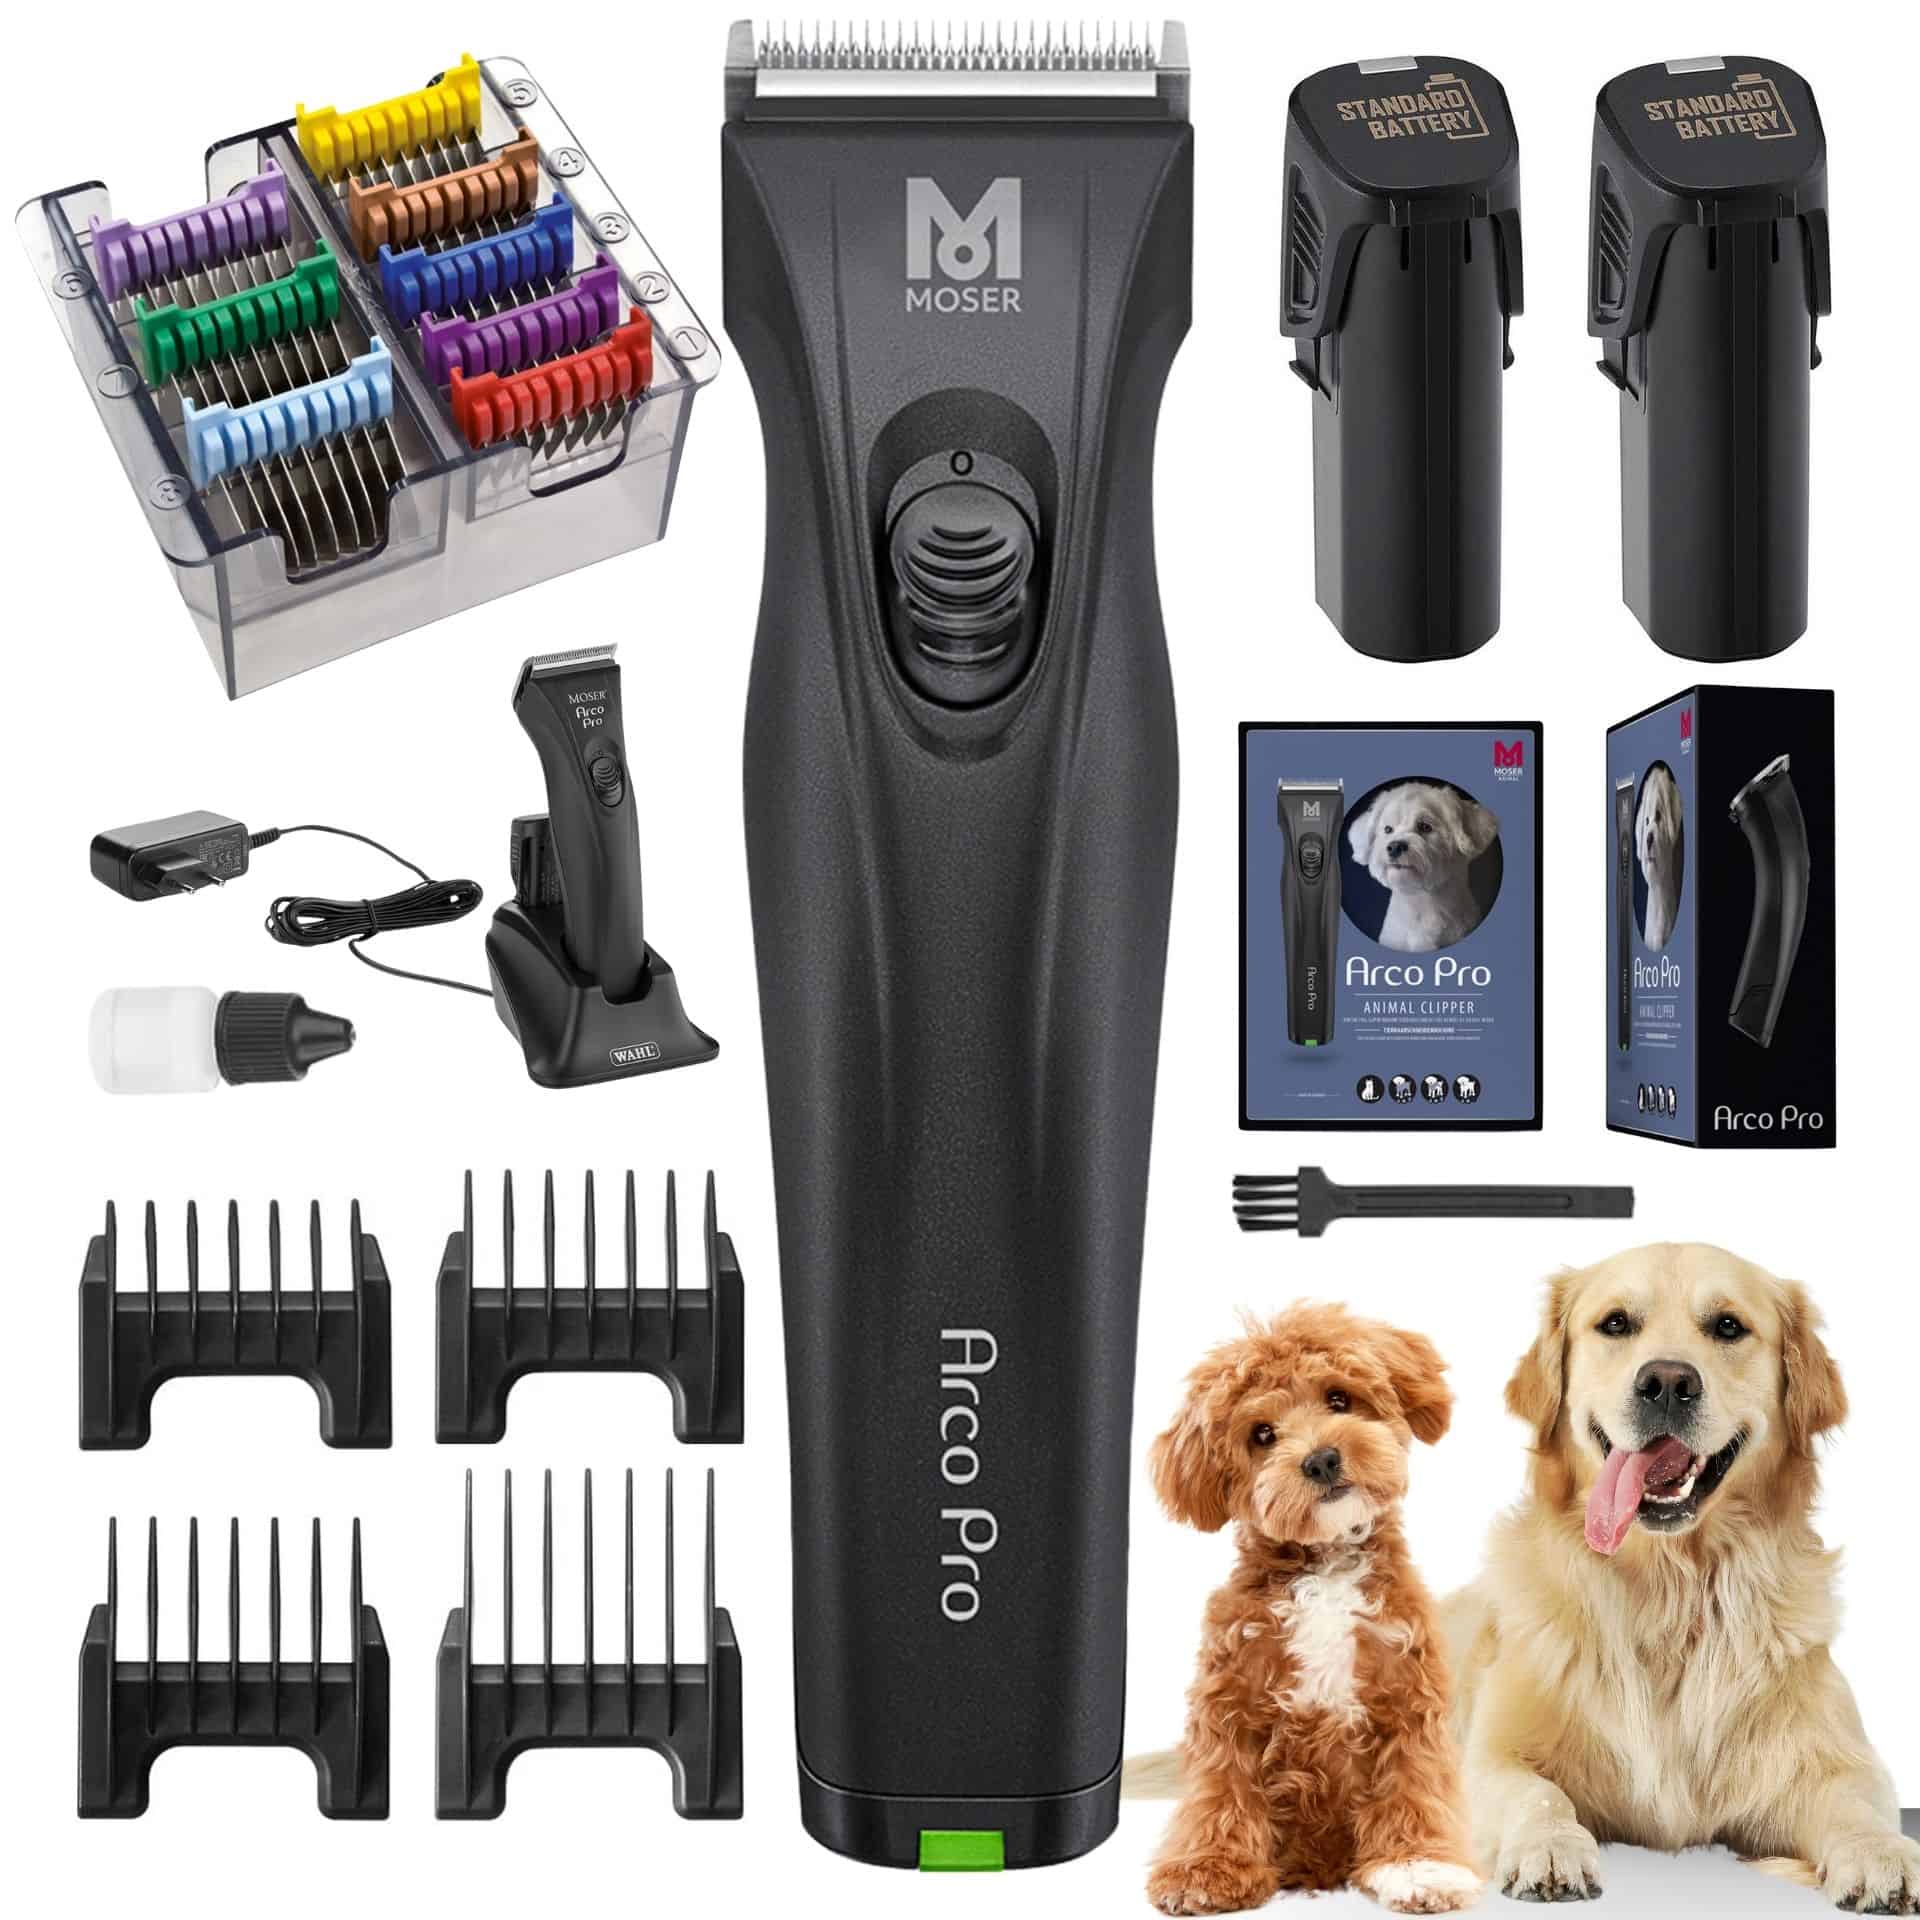 Moser Arco Pro Dog Clipper battery with attachment comb set